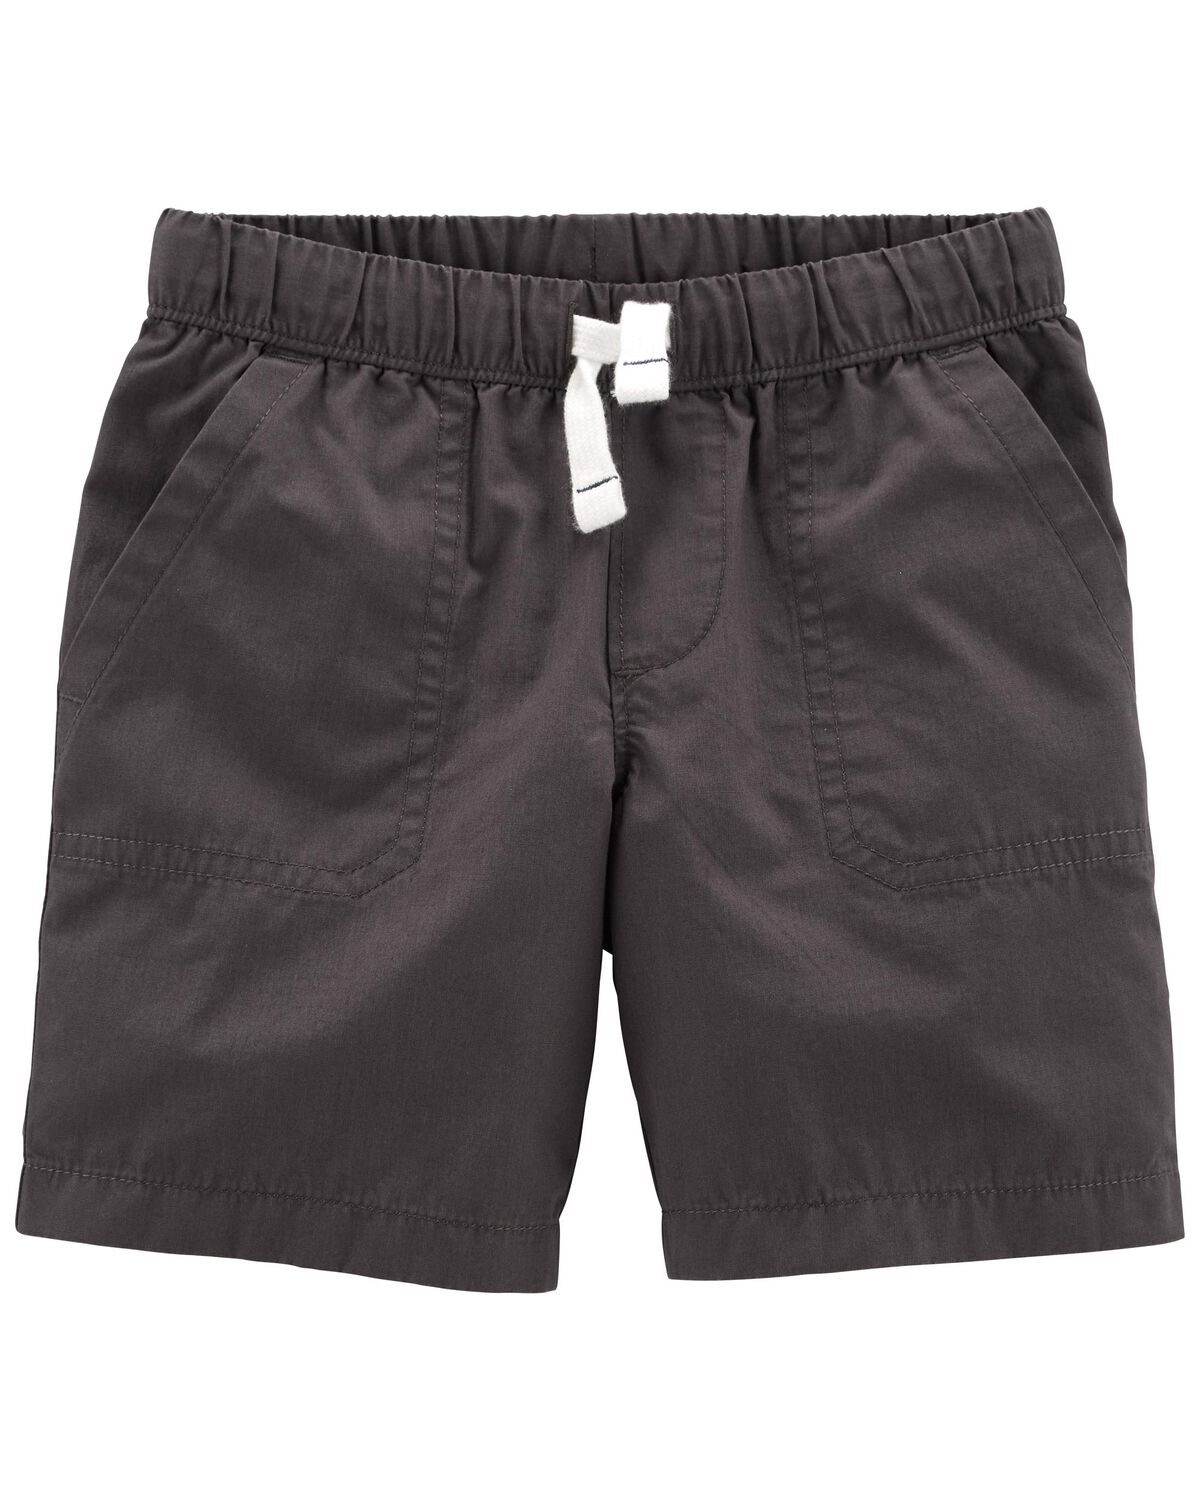 Grey Baby Pull-On Woven Shorts | carters.com